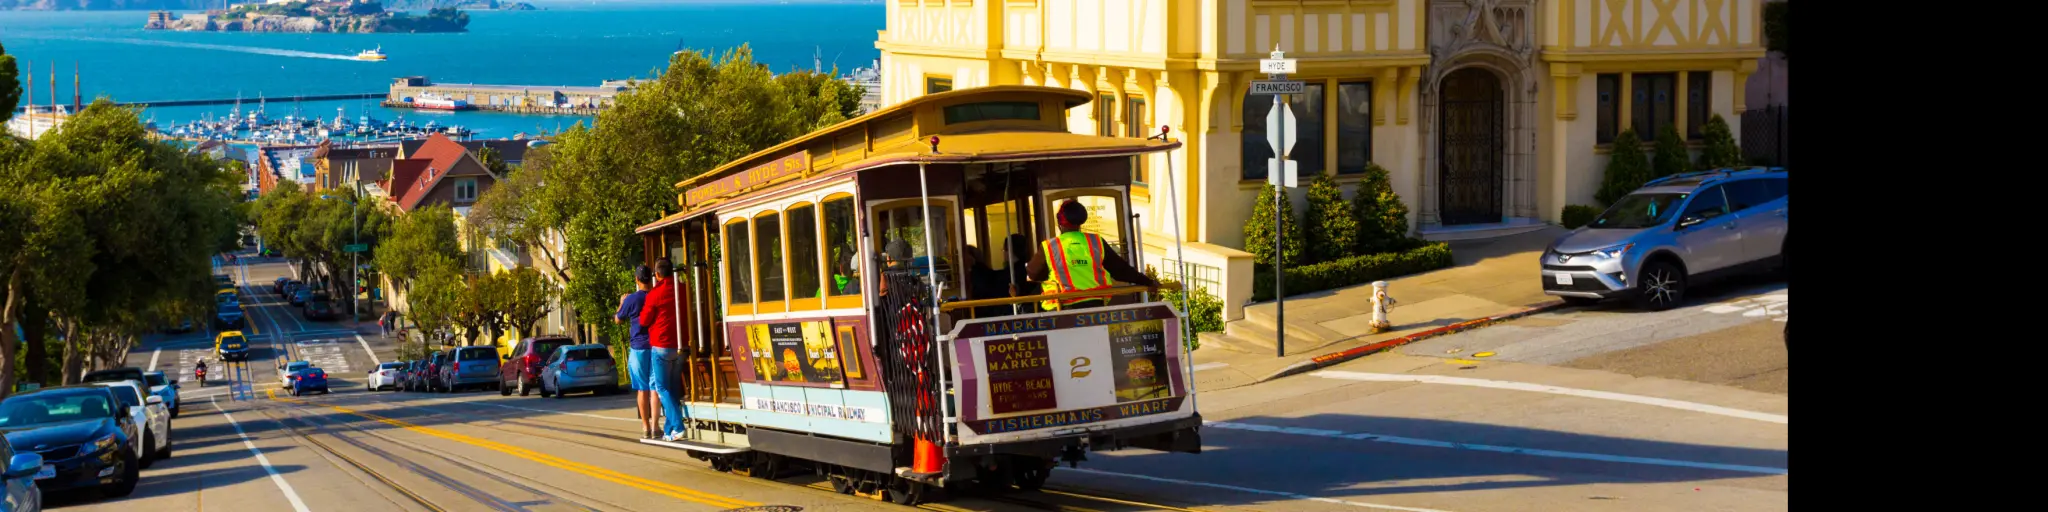 San Francisco cable car tram going downhill with Alcatraz in the background